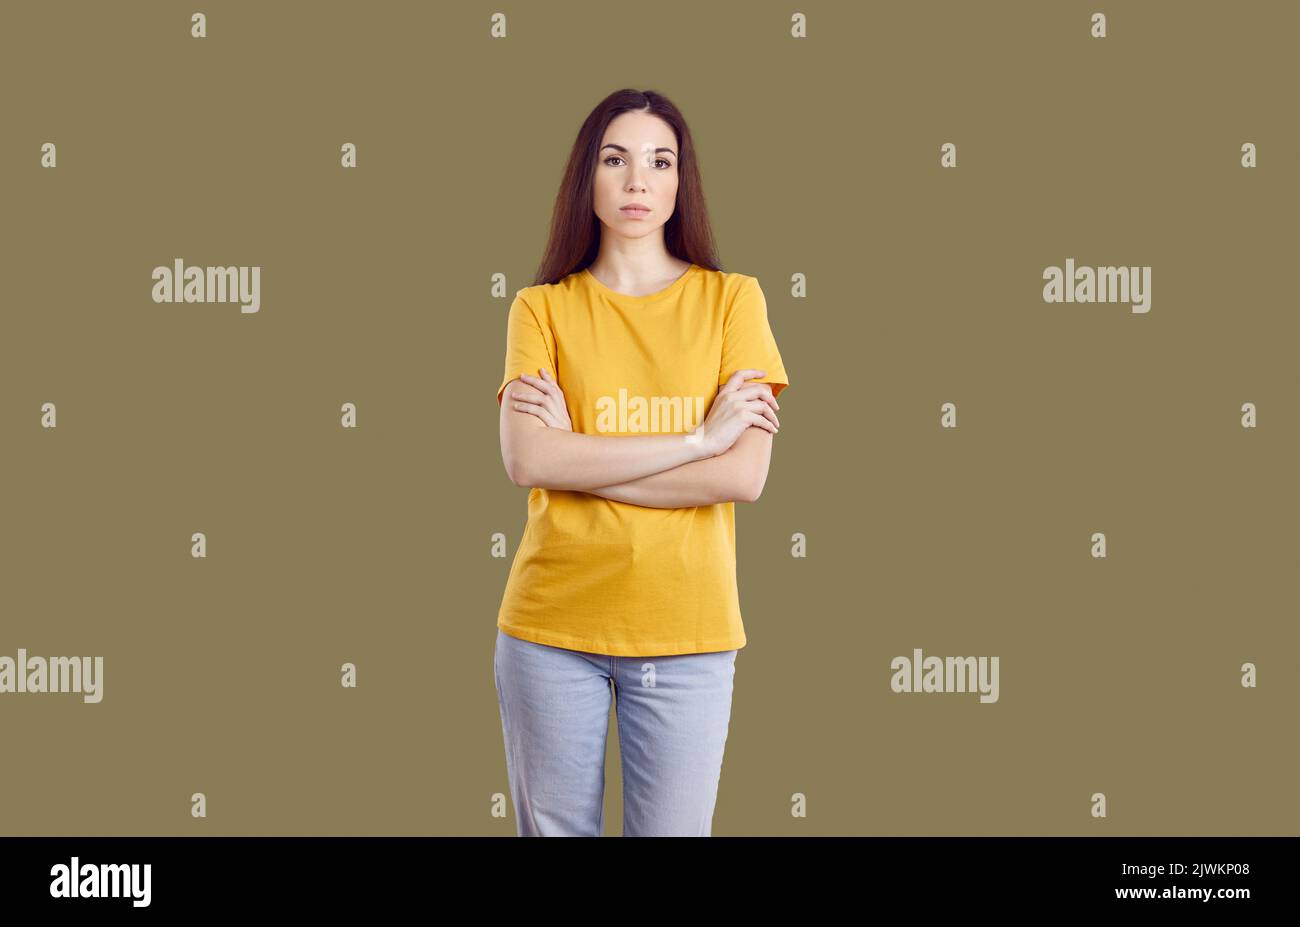 Portrait of angry grumpy young woman who looks at you sternly and skeptically on khaki background. Stock Photo